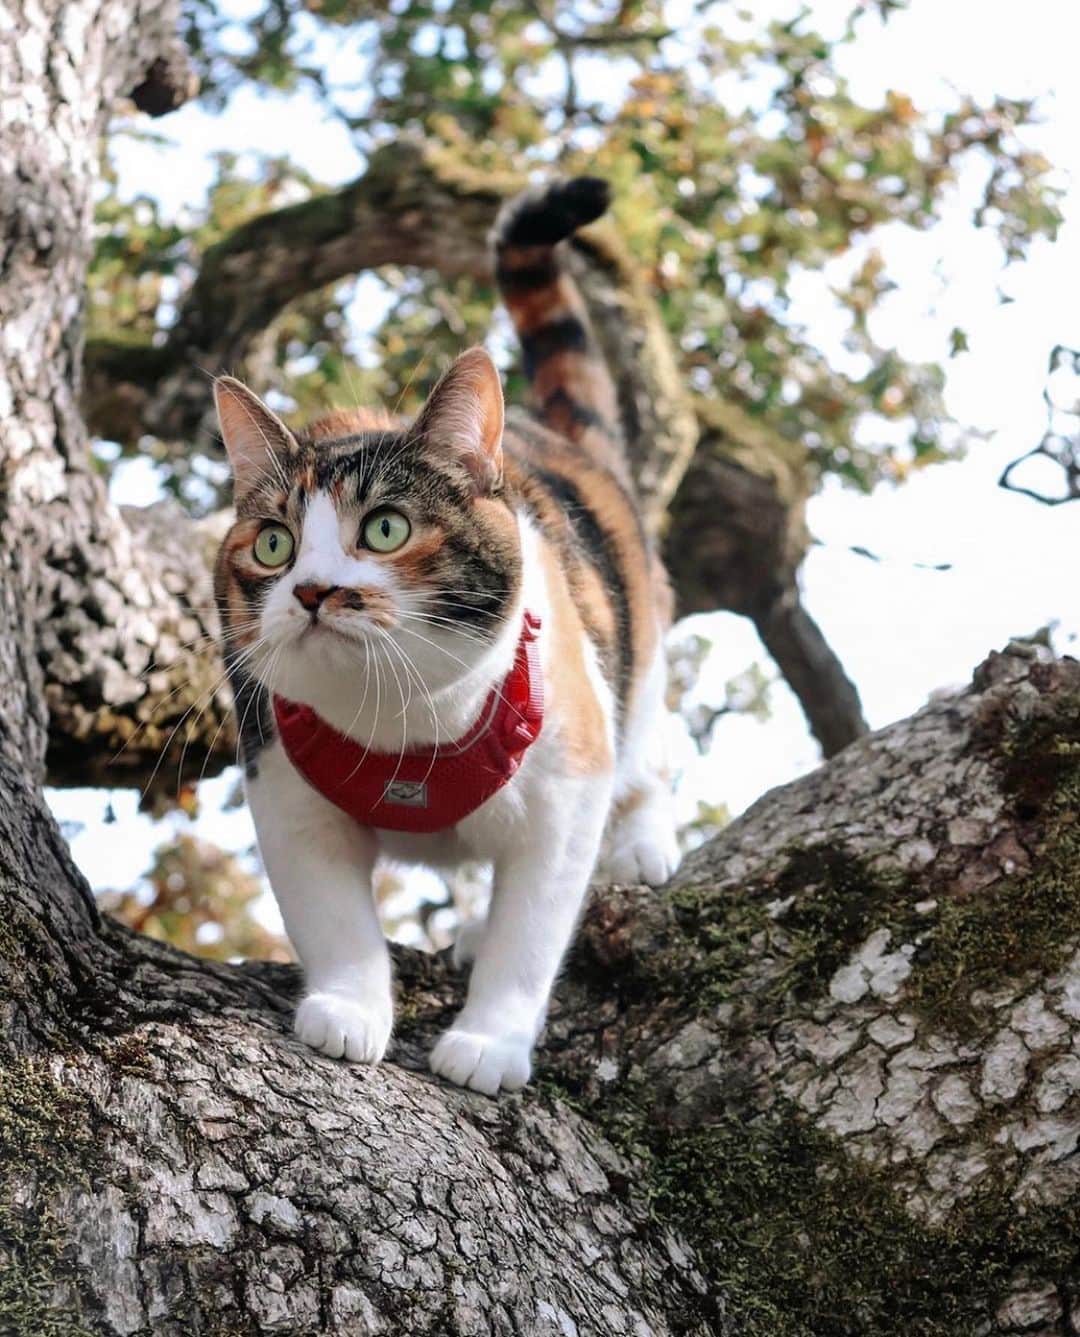 Bolt and Keelのインスタグラム：「Meet Aspen 🐱 This awesome adventure kitty loves trees, logs and scenic views!  . @adventrapets ➡️ @thebitchycalico  —————————————————— Follow @adventrapets to meet cute, brave and inspiring adventure pets from all over the world! 🌲🐶🐱🌲  • TAG US IN YOUR POSTS to get your little adventurer featured! #adventrapets ——————————————————」